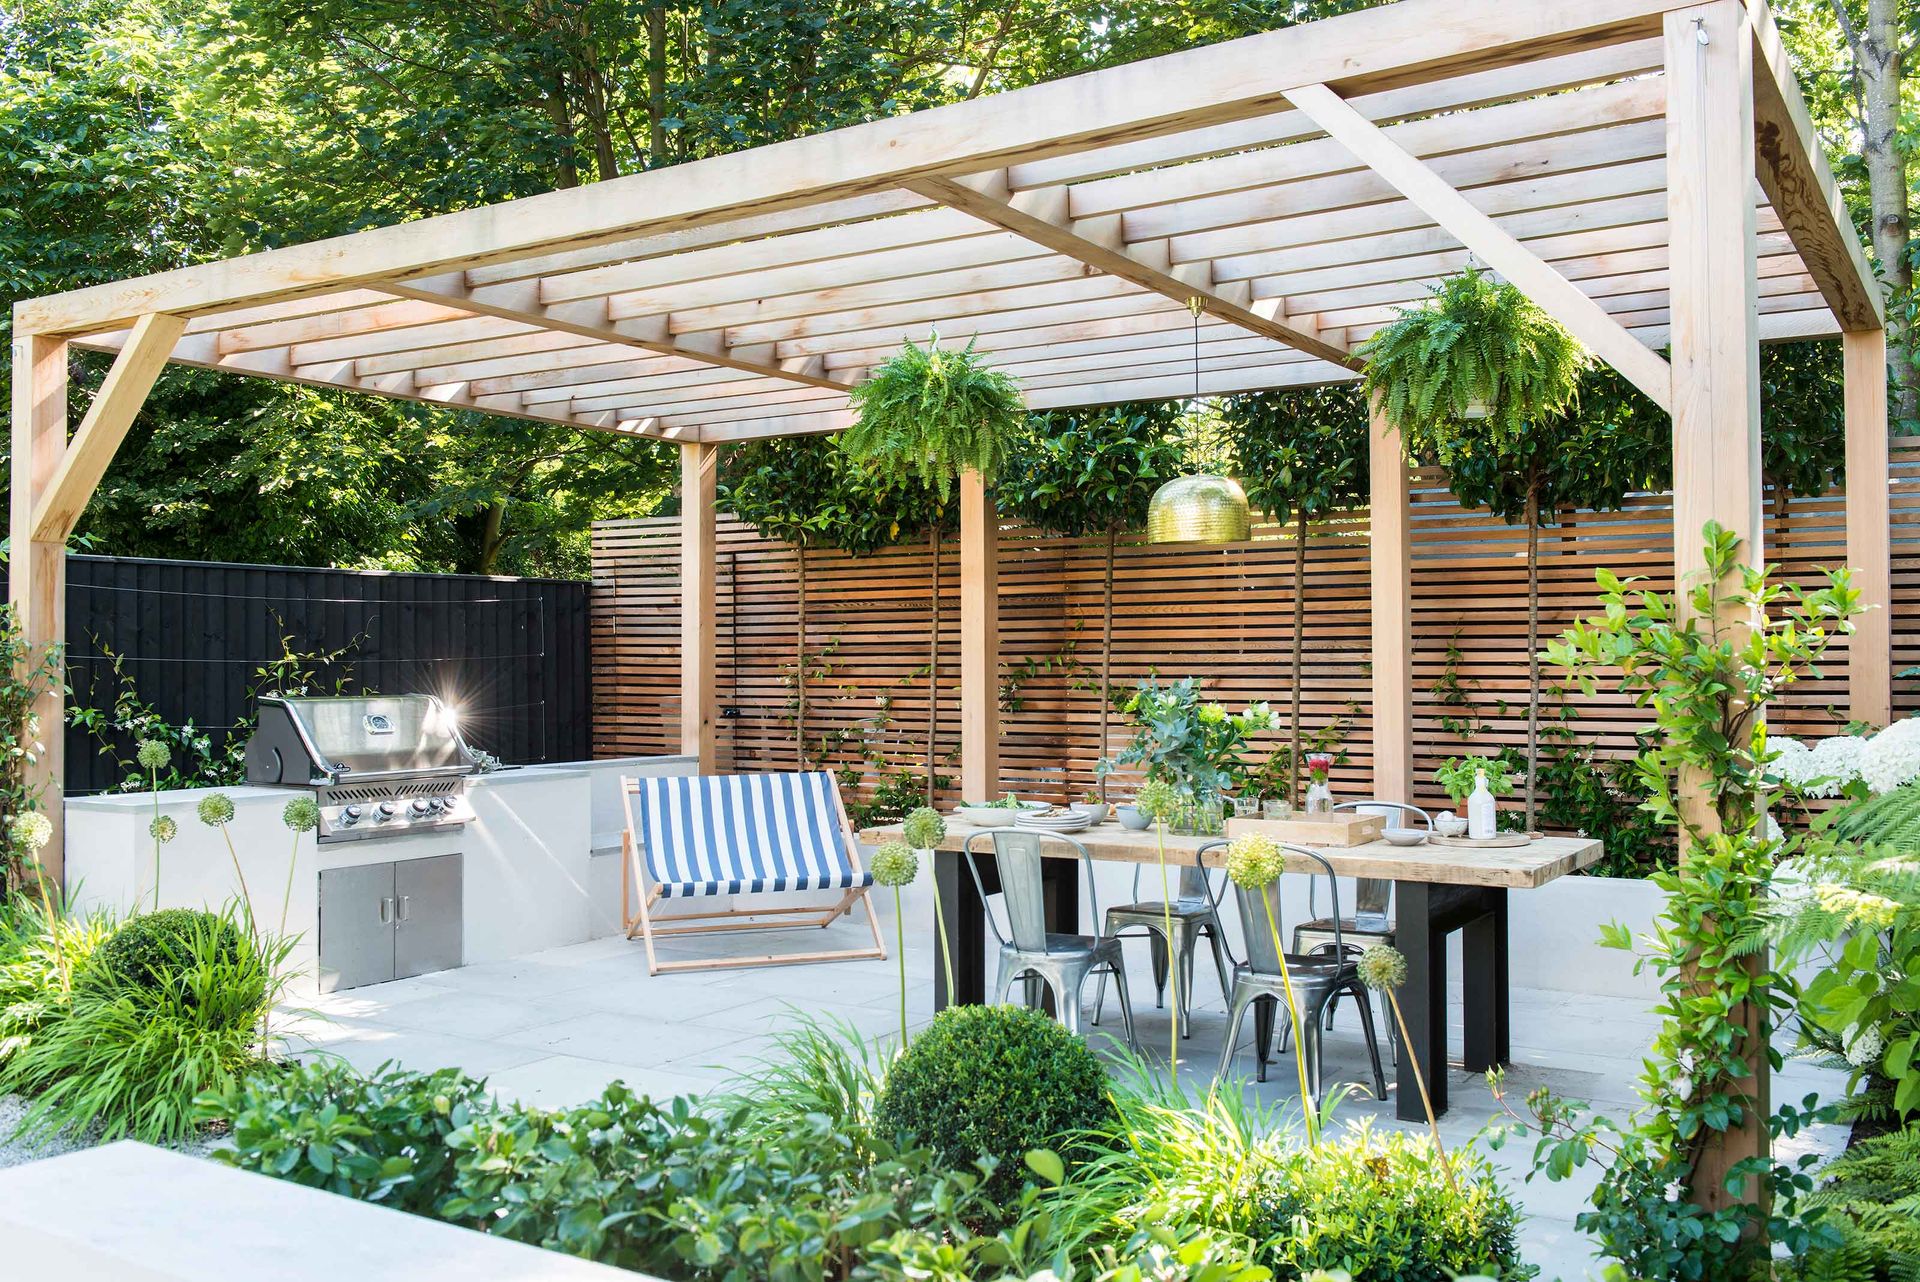 Pergola ideas: 16 stunning garden structures for added style and shade